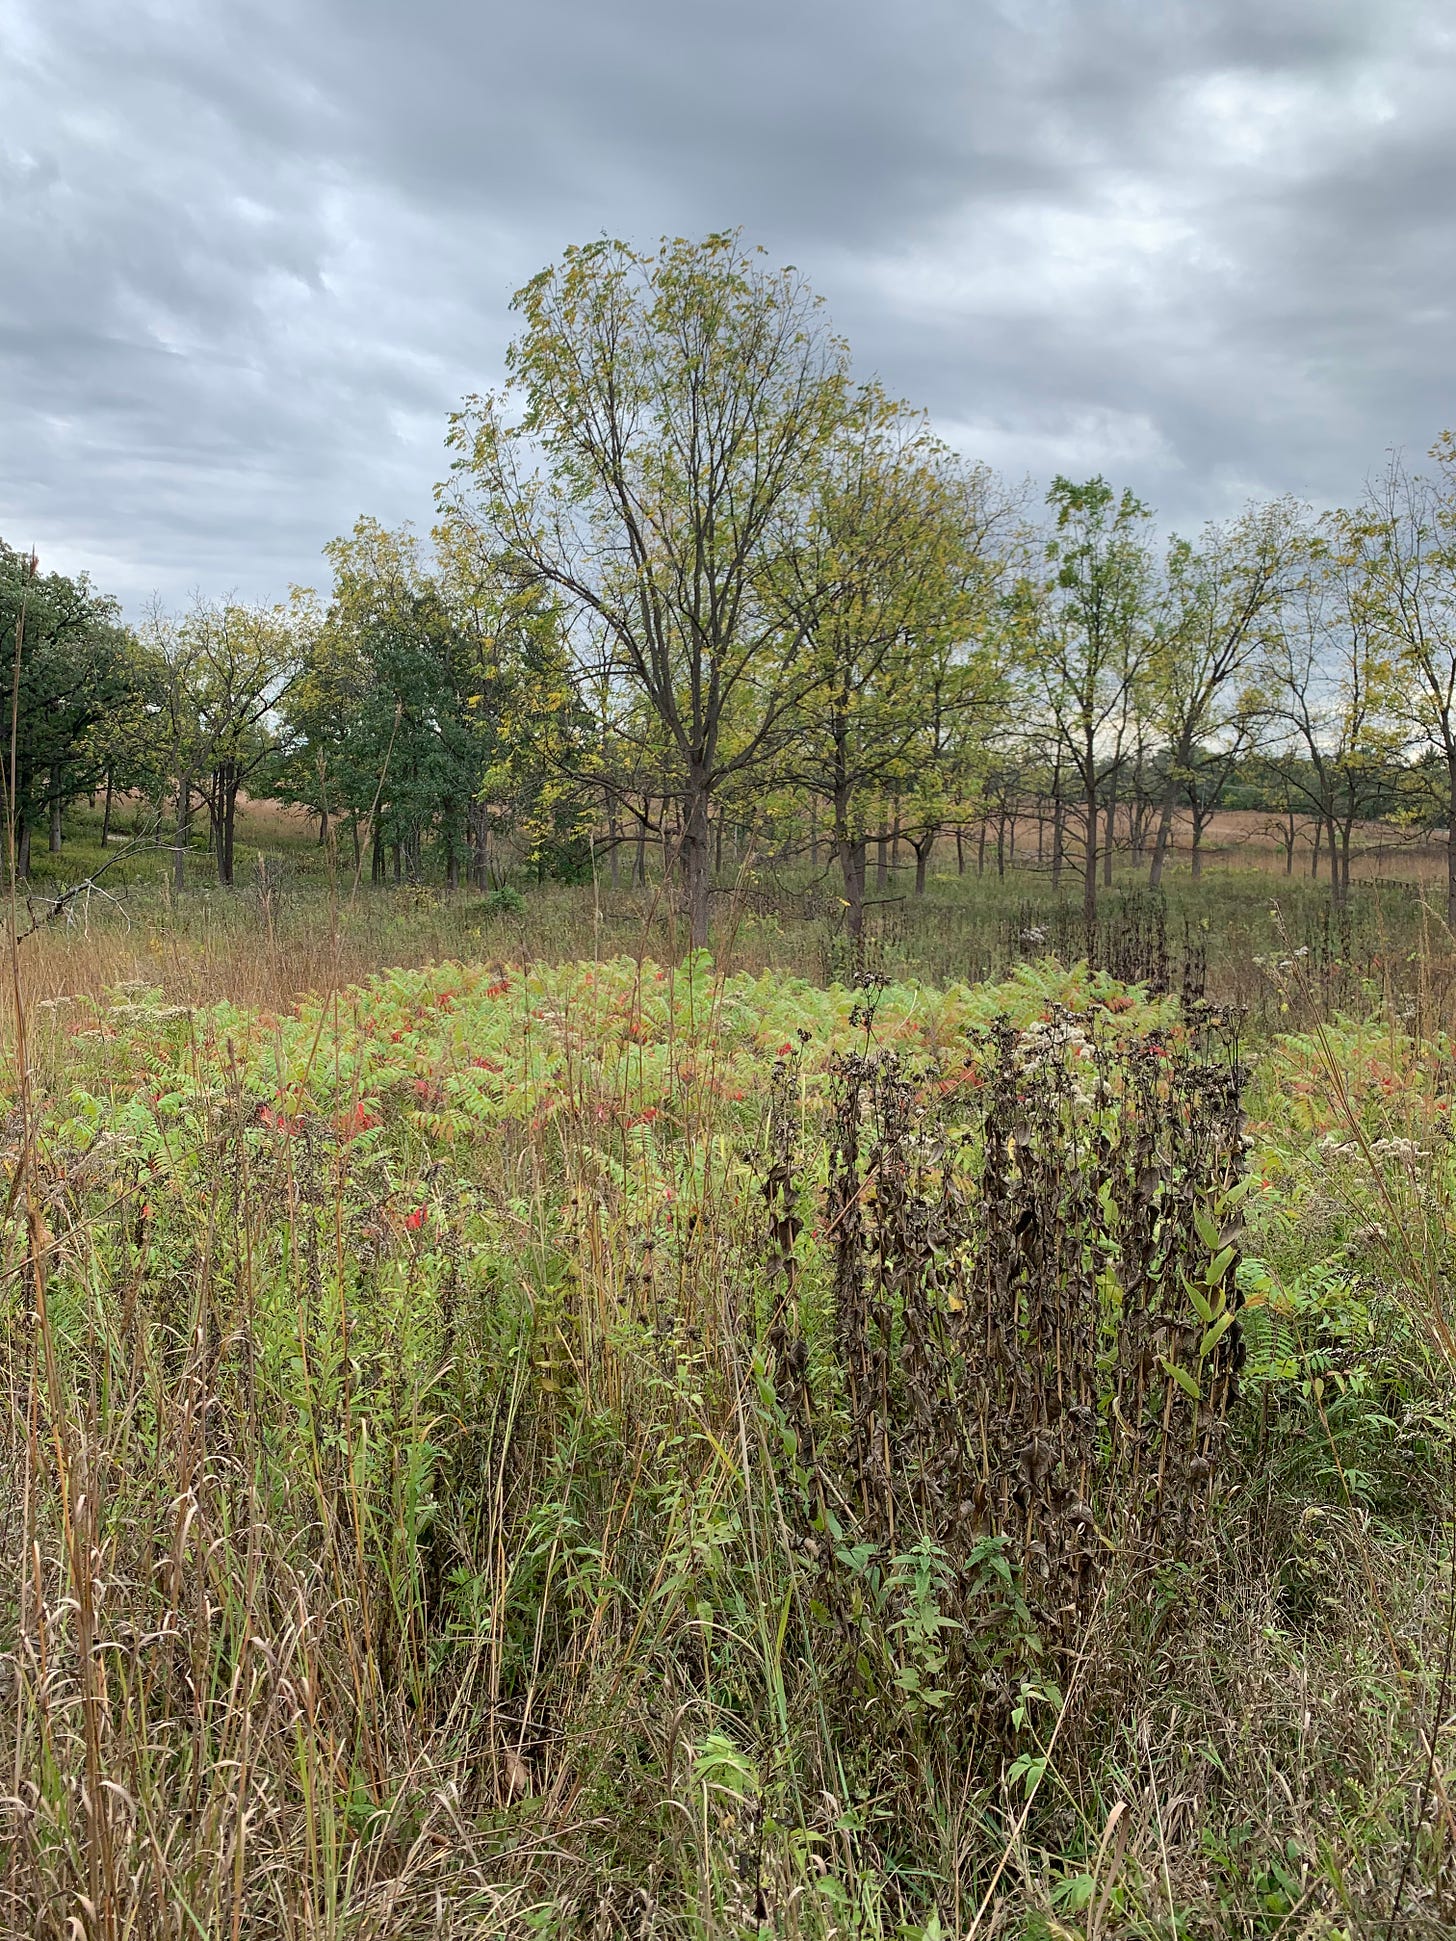 Prairie plants in light green, yellow, and brown with a few trees set against a grey cloudy sky.